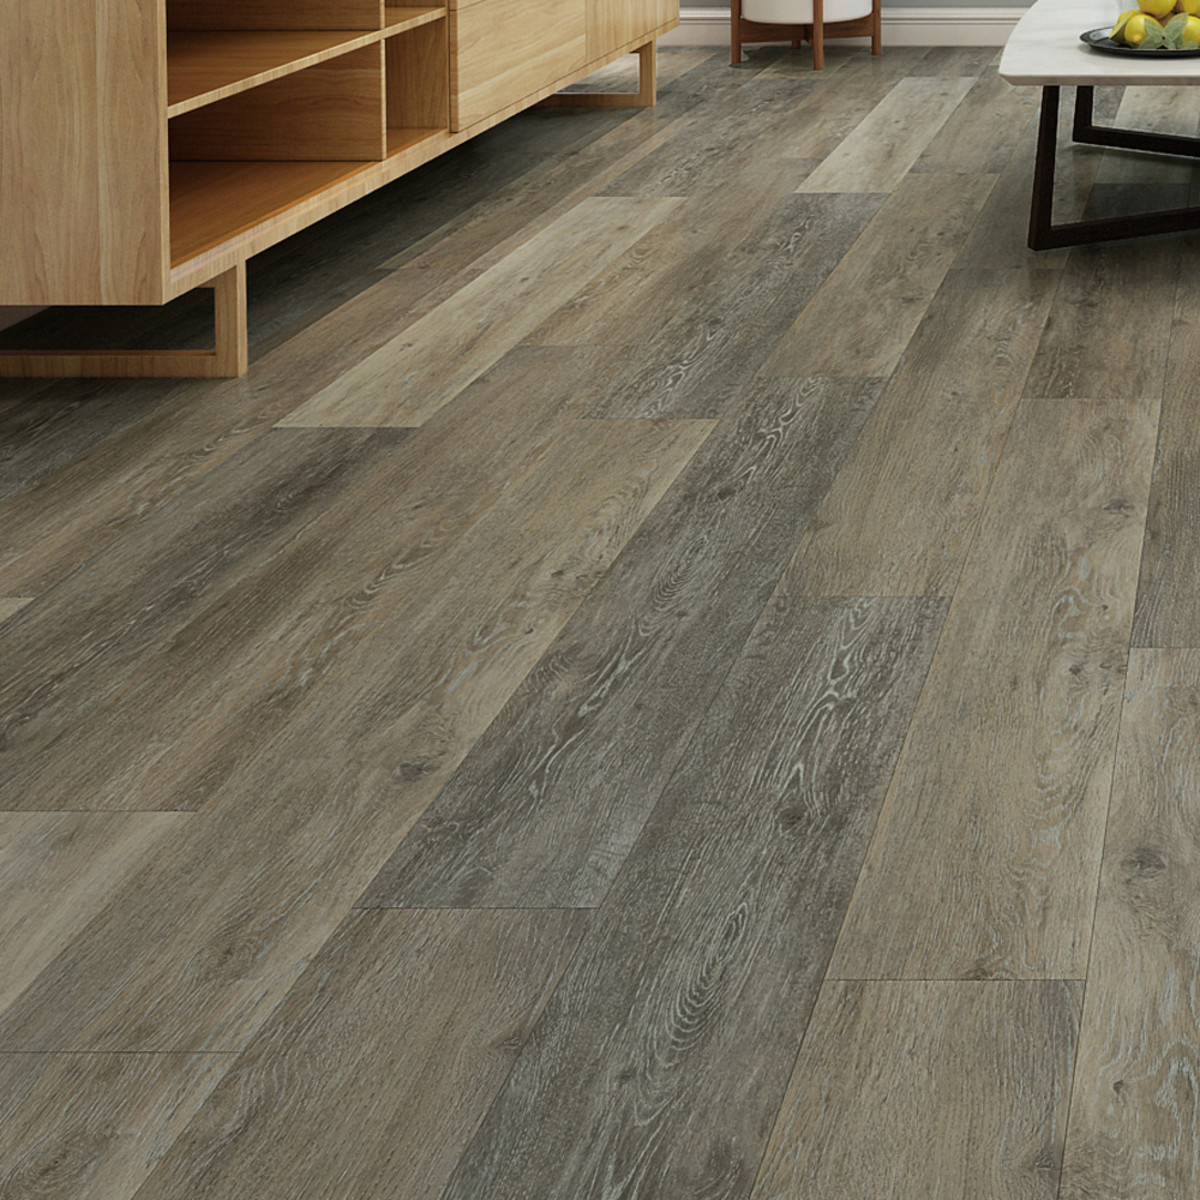 Reviews Parkay Floors Xpr Architect 5 2mm Polymer Rigid Core Waterproof Flooring Victorian Ash Xpr Pararcvic 3 35 Flooring Tools Installation Supplies Jnsflooringandsupplies Com The Only Thing Better Than Our Selection